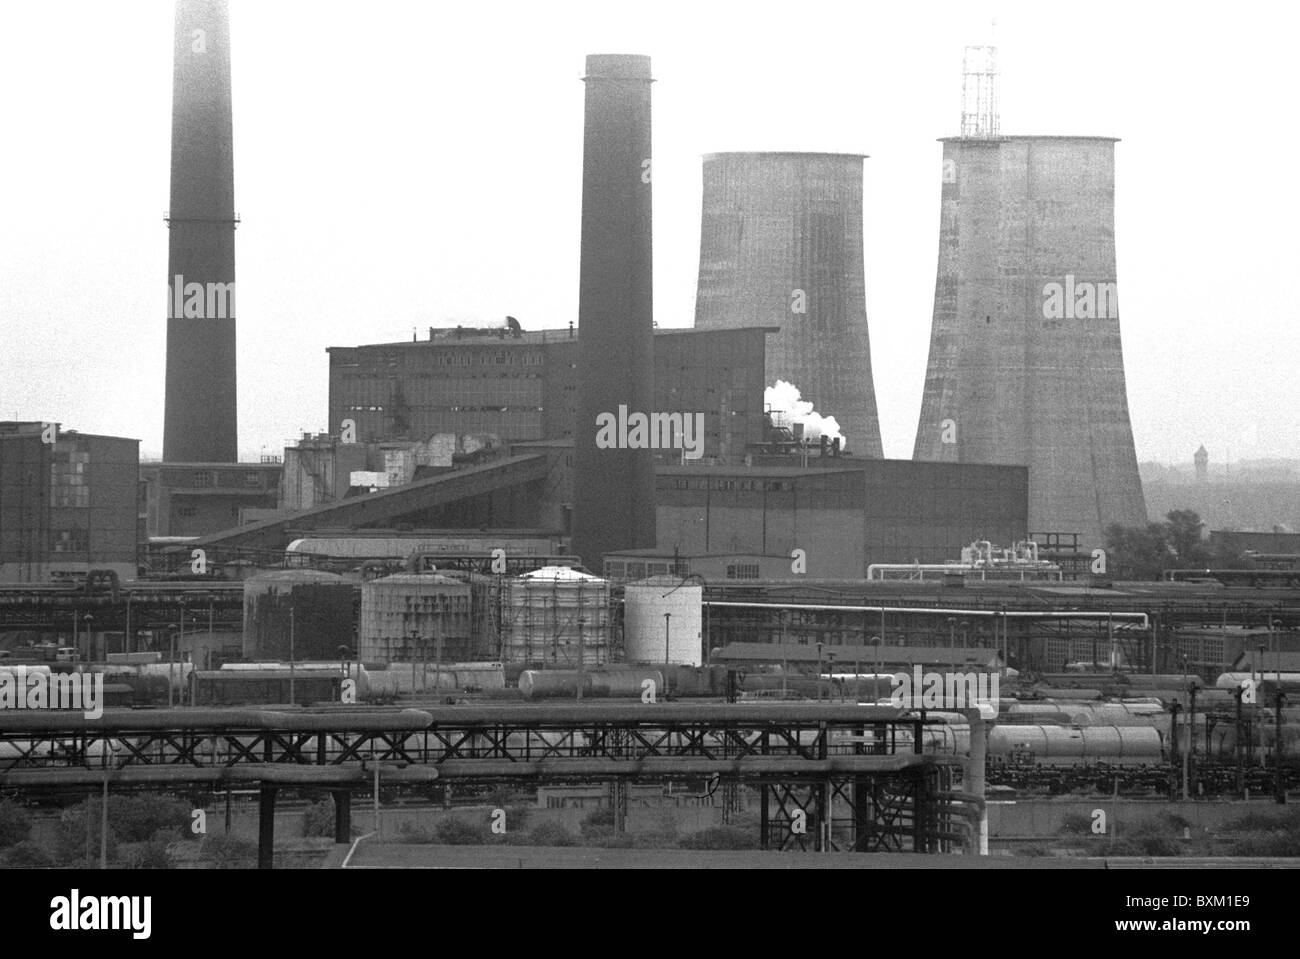 industry,companies,VEB Leuna,chemical plant near Leipzig,East-Germany,14.04.1990,1990s,90s,20th century,historic,historical,state holding combine,chimney,smokestack,chimneys,smokestacks,cooling tower,cooling towers,become obsolete industrial plant,industrial plants,air pollution,exhaust gas pollution,damage to the environment,environmental pollution,pollution of the environment,environmental pollution,ecological damage,contamination,airborne pollutant,airborne pollutants,exhaust emission,pollutant emission,CO2,symbolic,symbolic,Additional-Rights-Clearences-Not Available Stock Photo